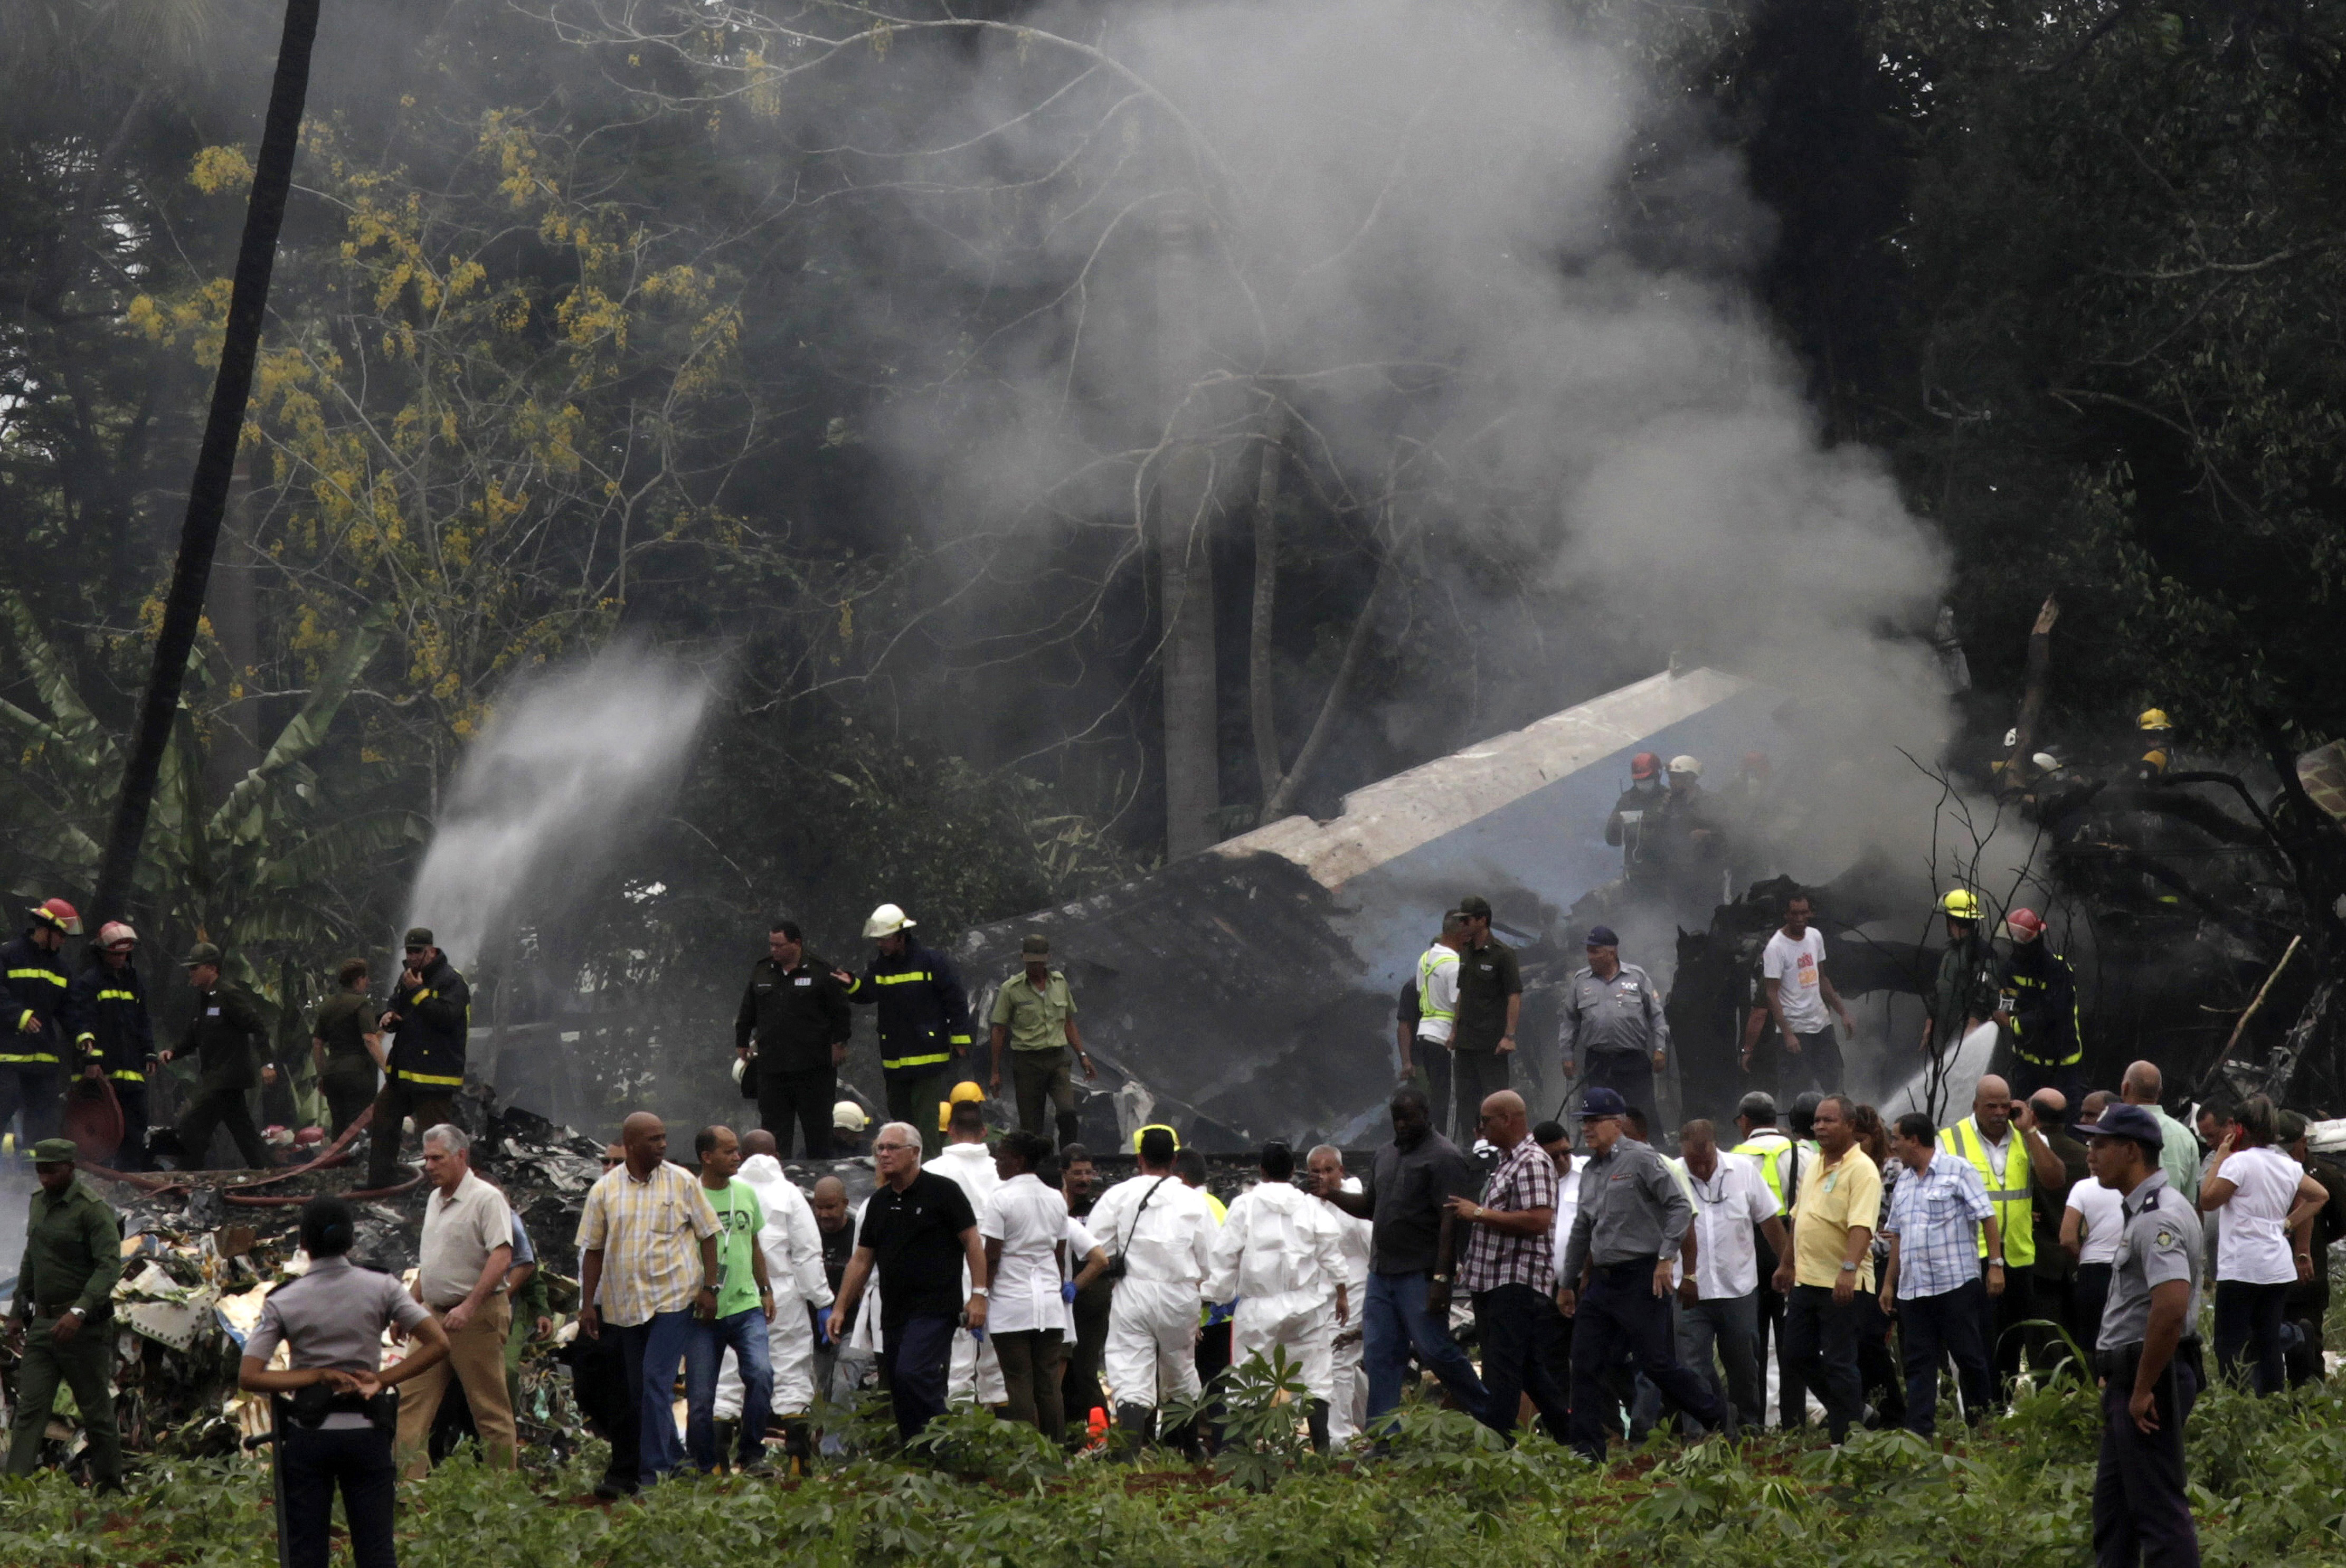 Cuba's President Miguel Diaz-Canel, third from left, walks away from the site where a Boeing 737 plummeted into a yuca field with more than 100 passengers on board, in Havana, Cuba, Friday, May 18, 2018. The Cuban airliner crashed just after takeoff from Havana's international airport on Friday. (AP Photo/Enrique de la Osa) cuba